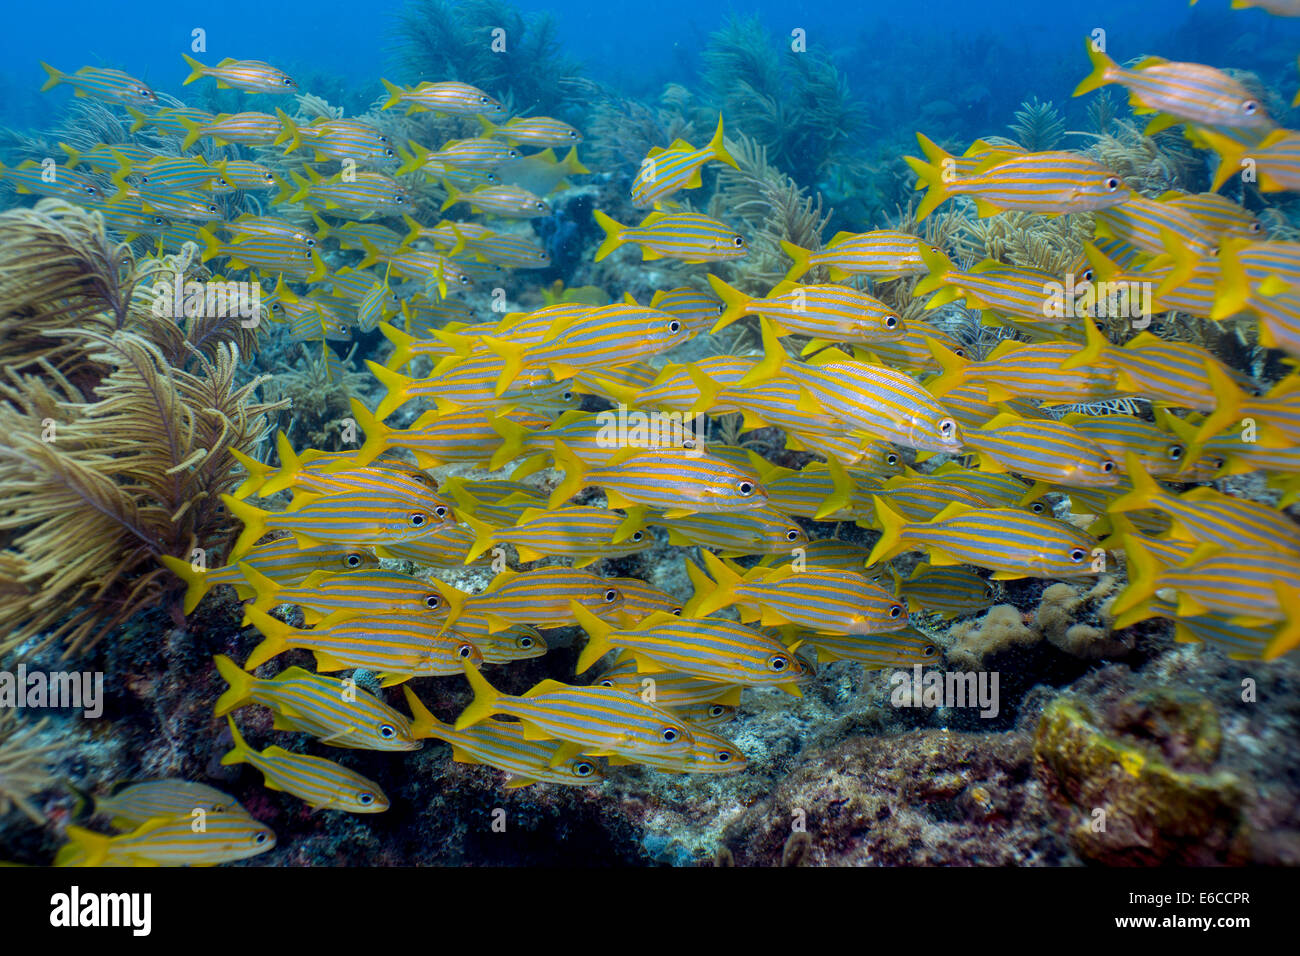 Marine sanctuaries promote protection of marine life, such as these Smallmouth grunts. Stock Photo